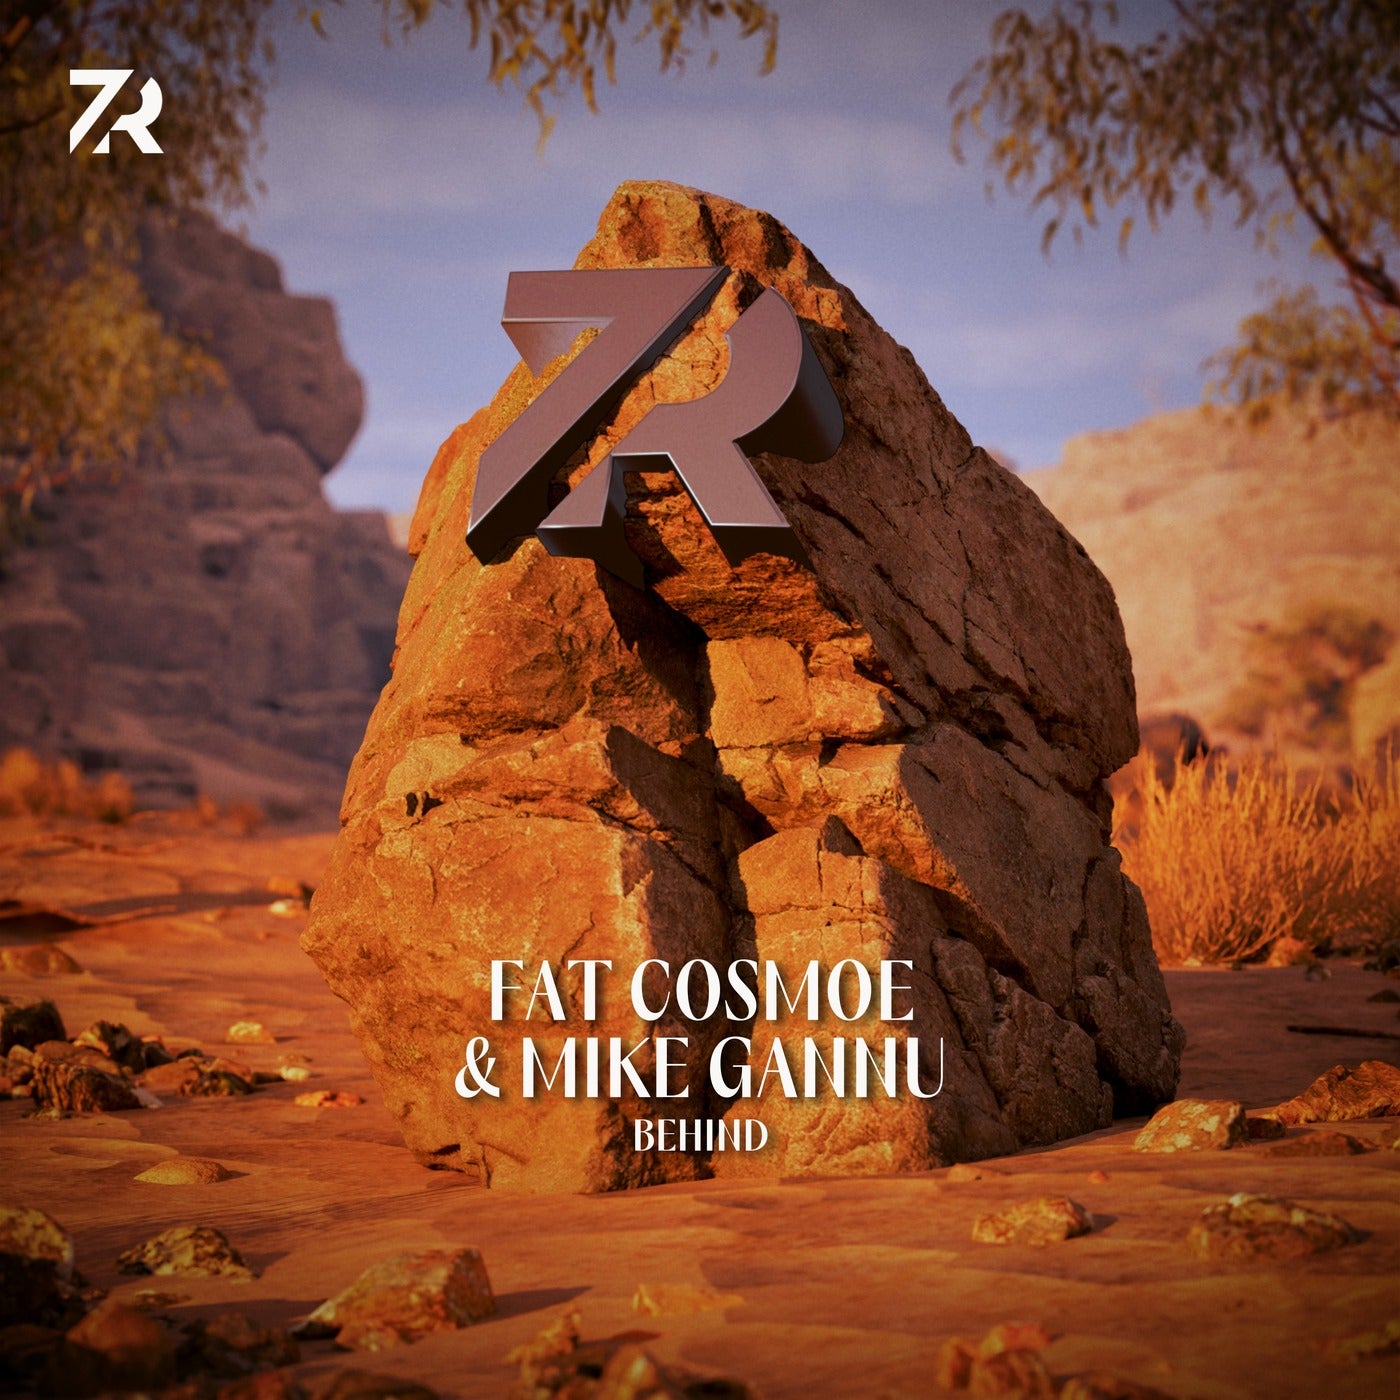 image cover: Fat Cosmoe, Mike Gannu - Behind on 7Rituals